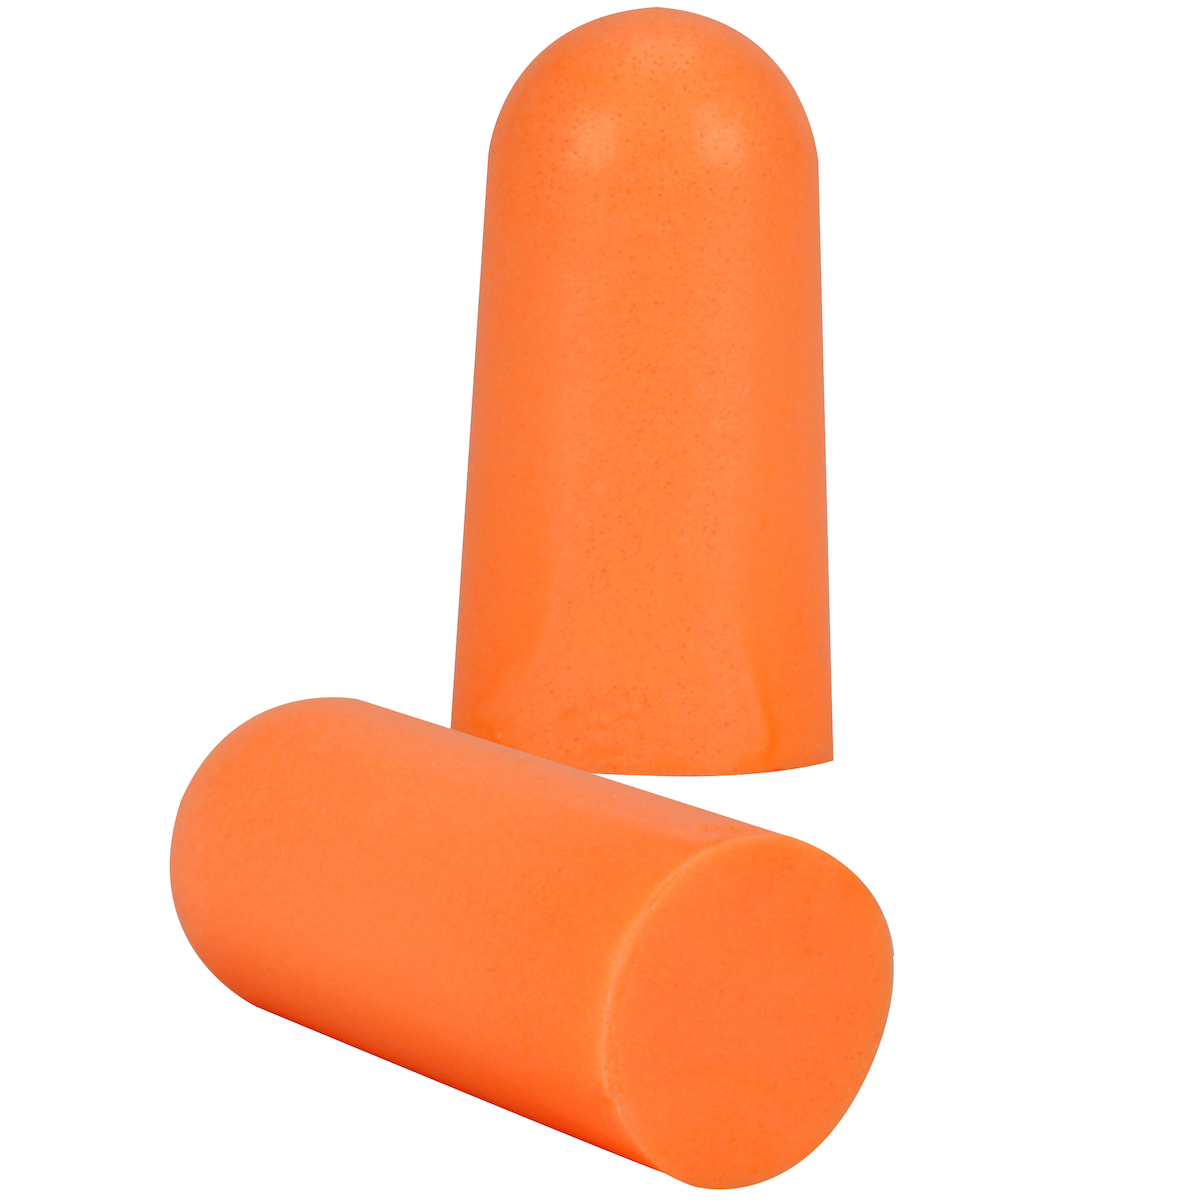 Pip Mega Bullet Plus Disposable Soft Foam Ear Plugs from GME Supply